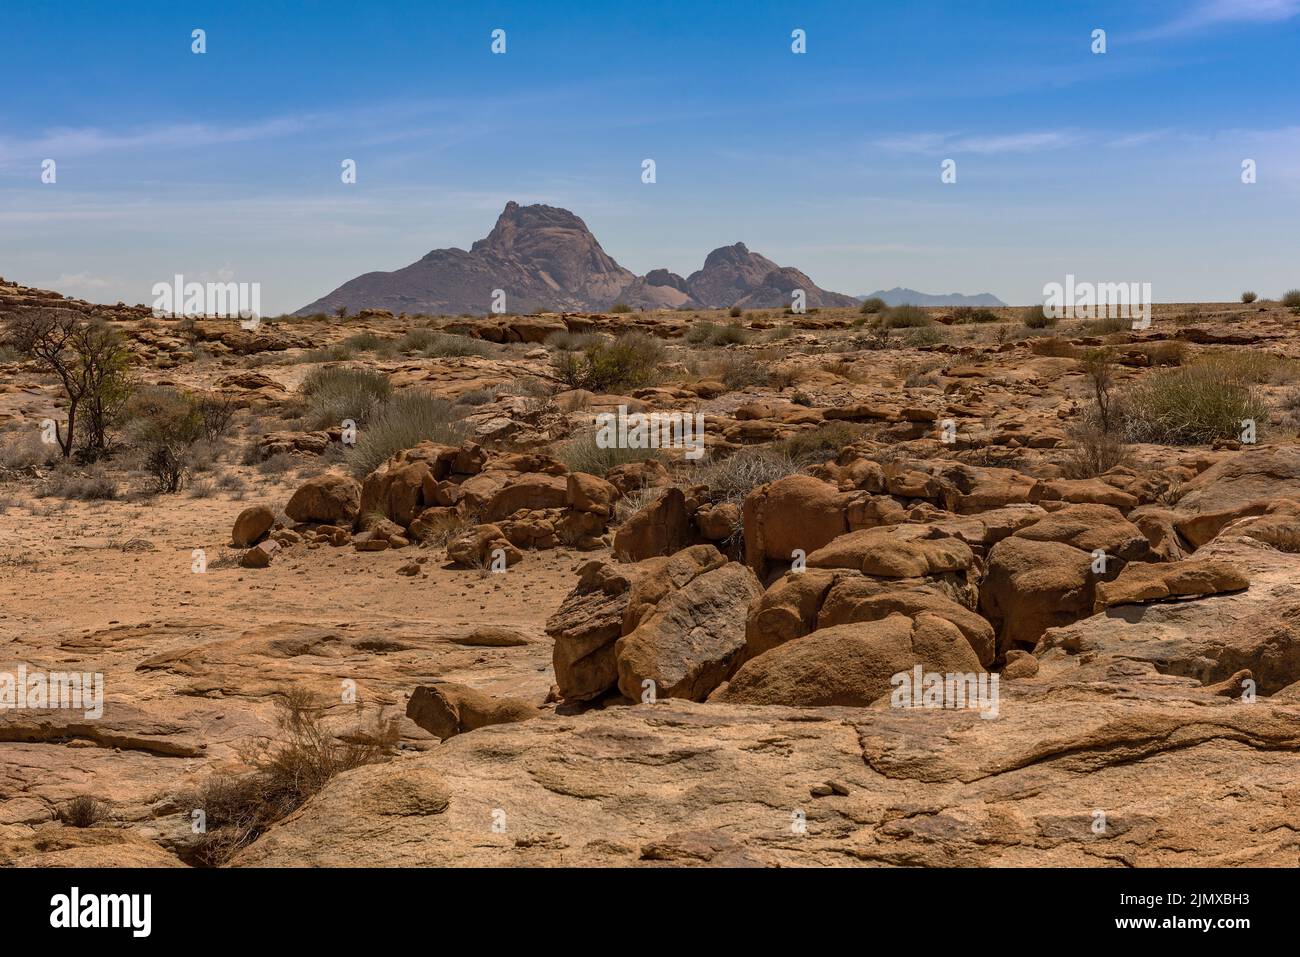 landscape at the Spitzkoppe rock formation, Namibia Stock Photo